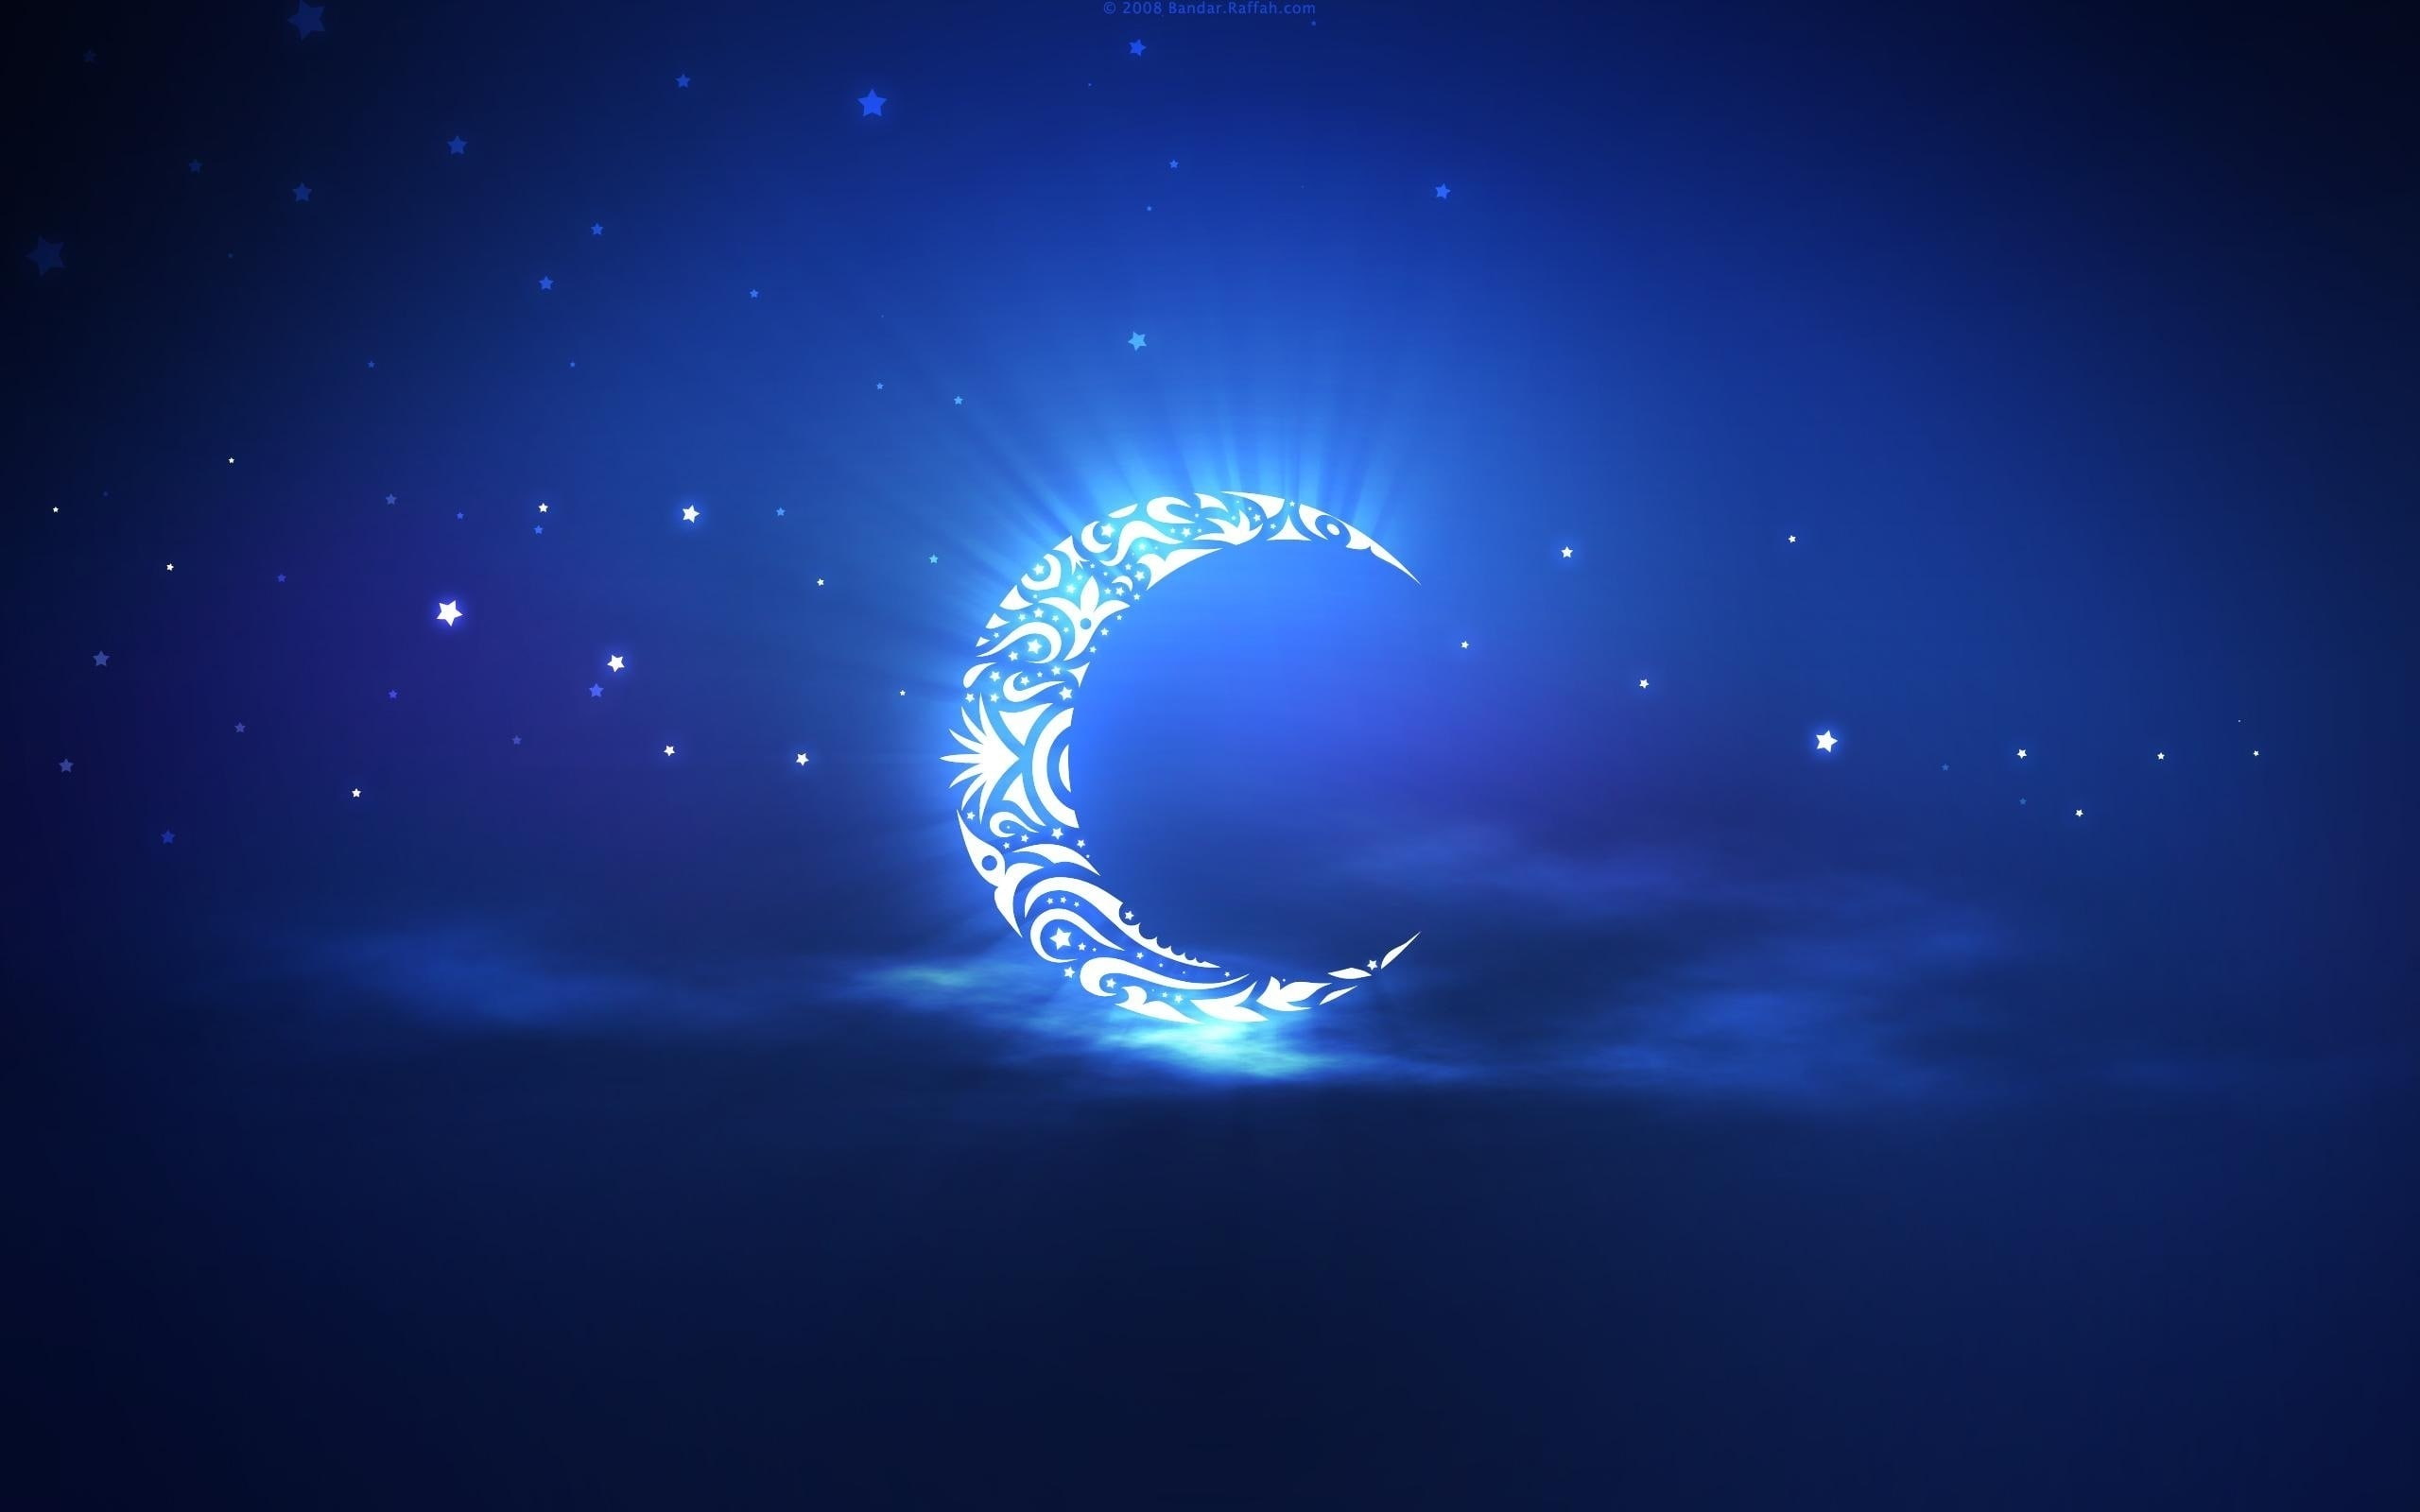 Artistic creation, the crescent moon in the sky, half moon wallpaper